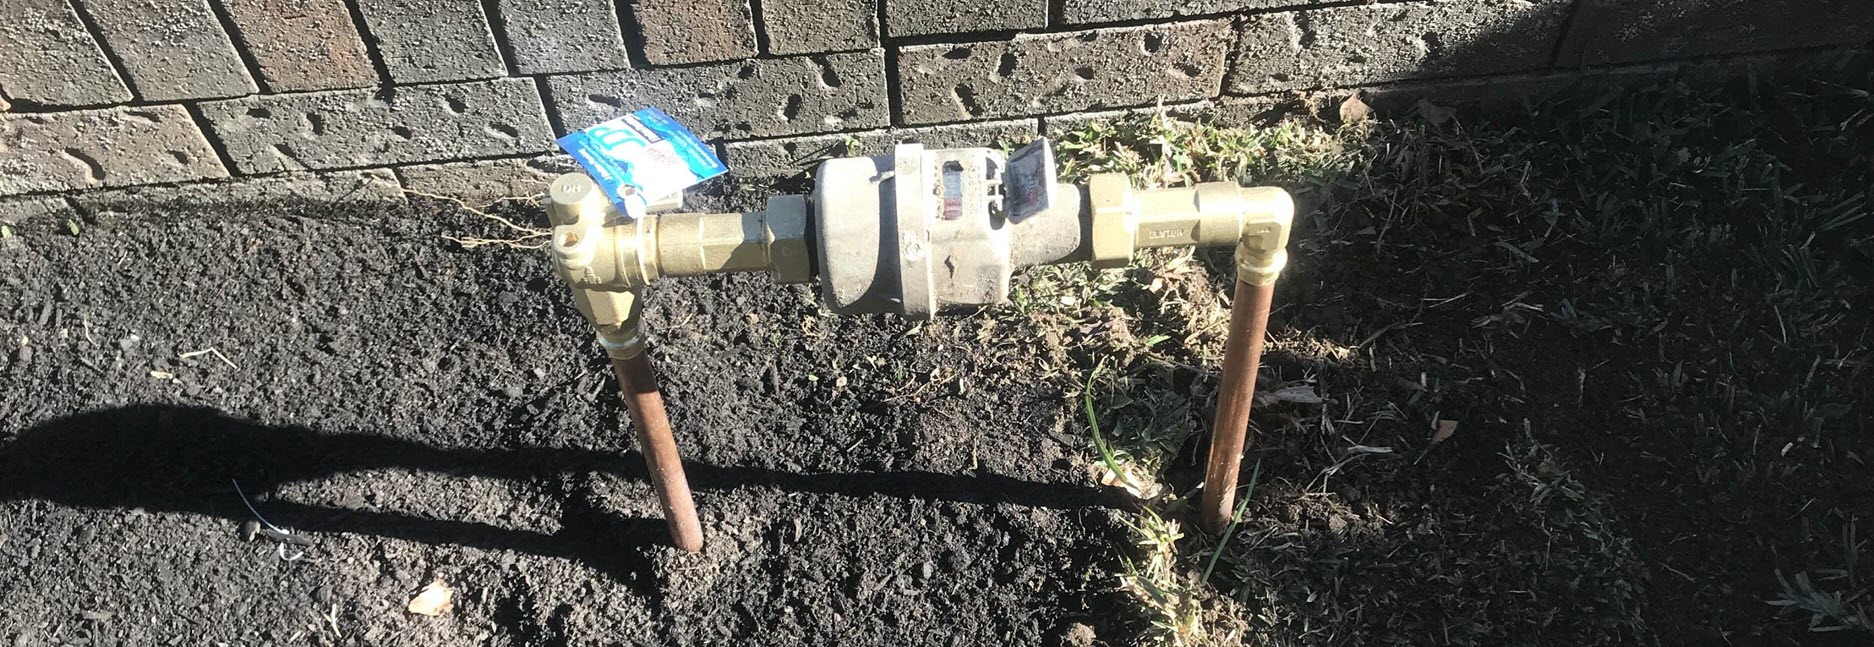 A Moved Non-Compliant Water Meter